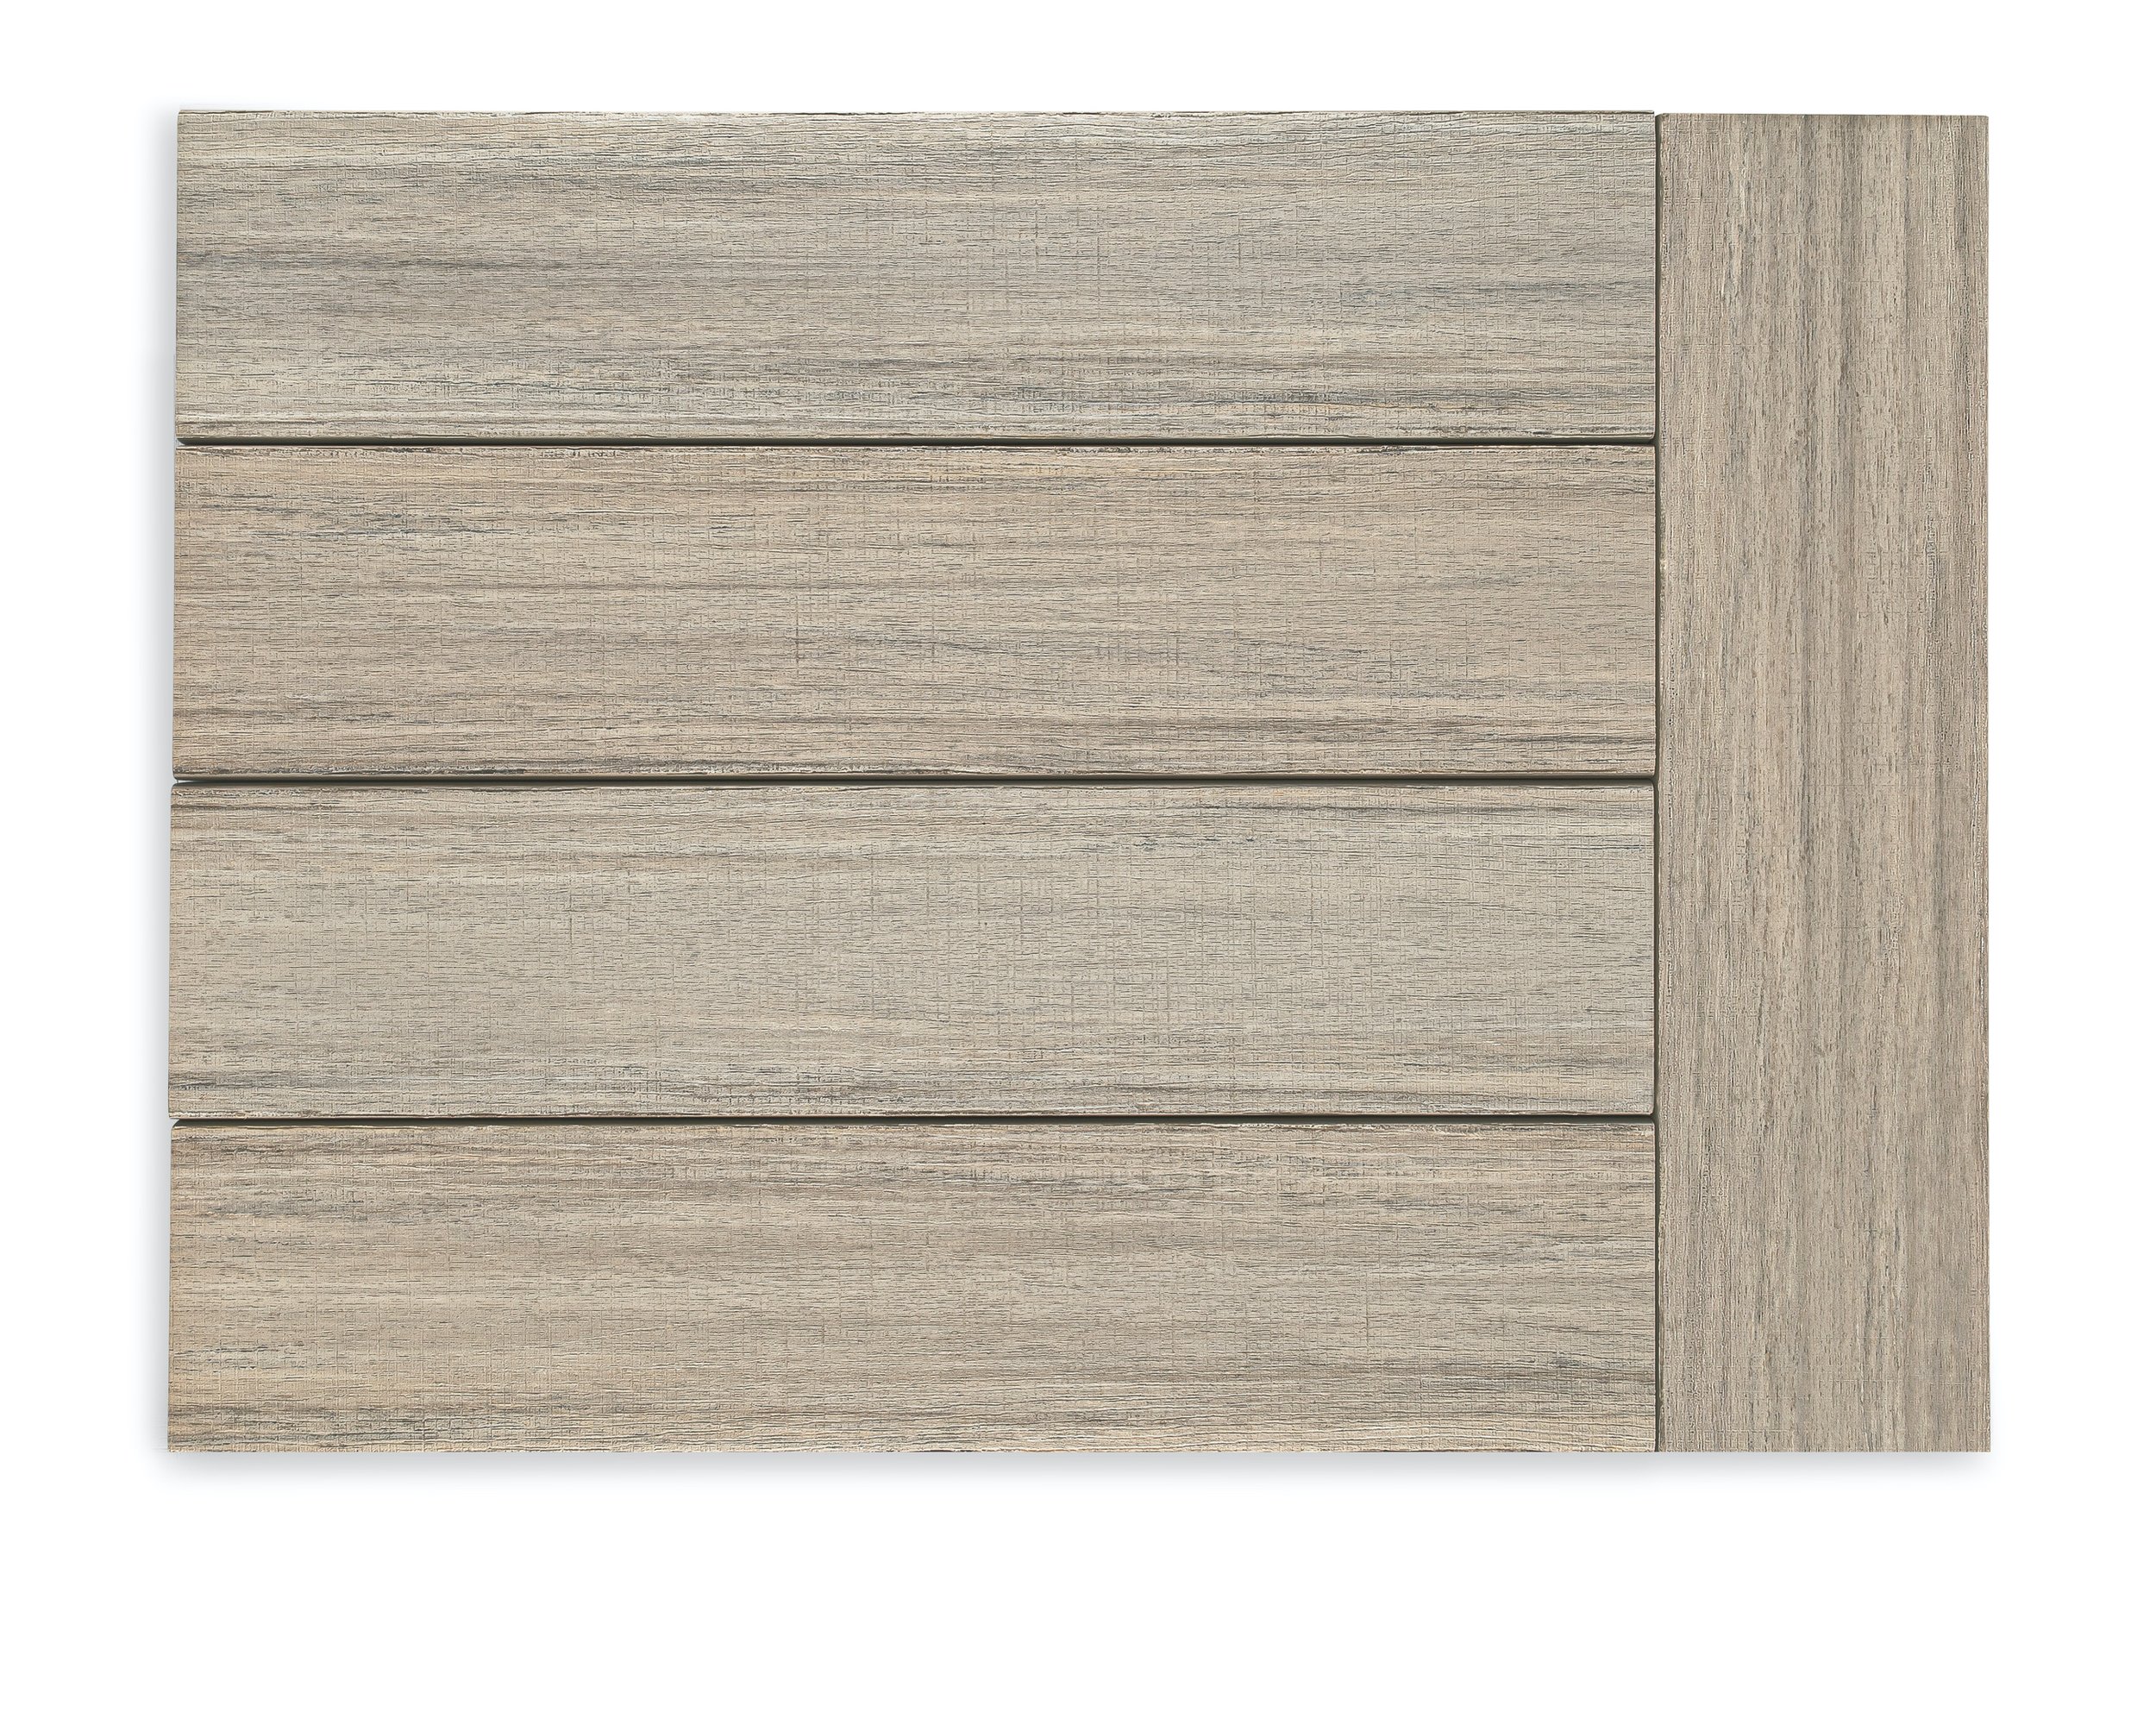 French white oak color timber wood.